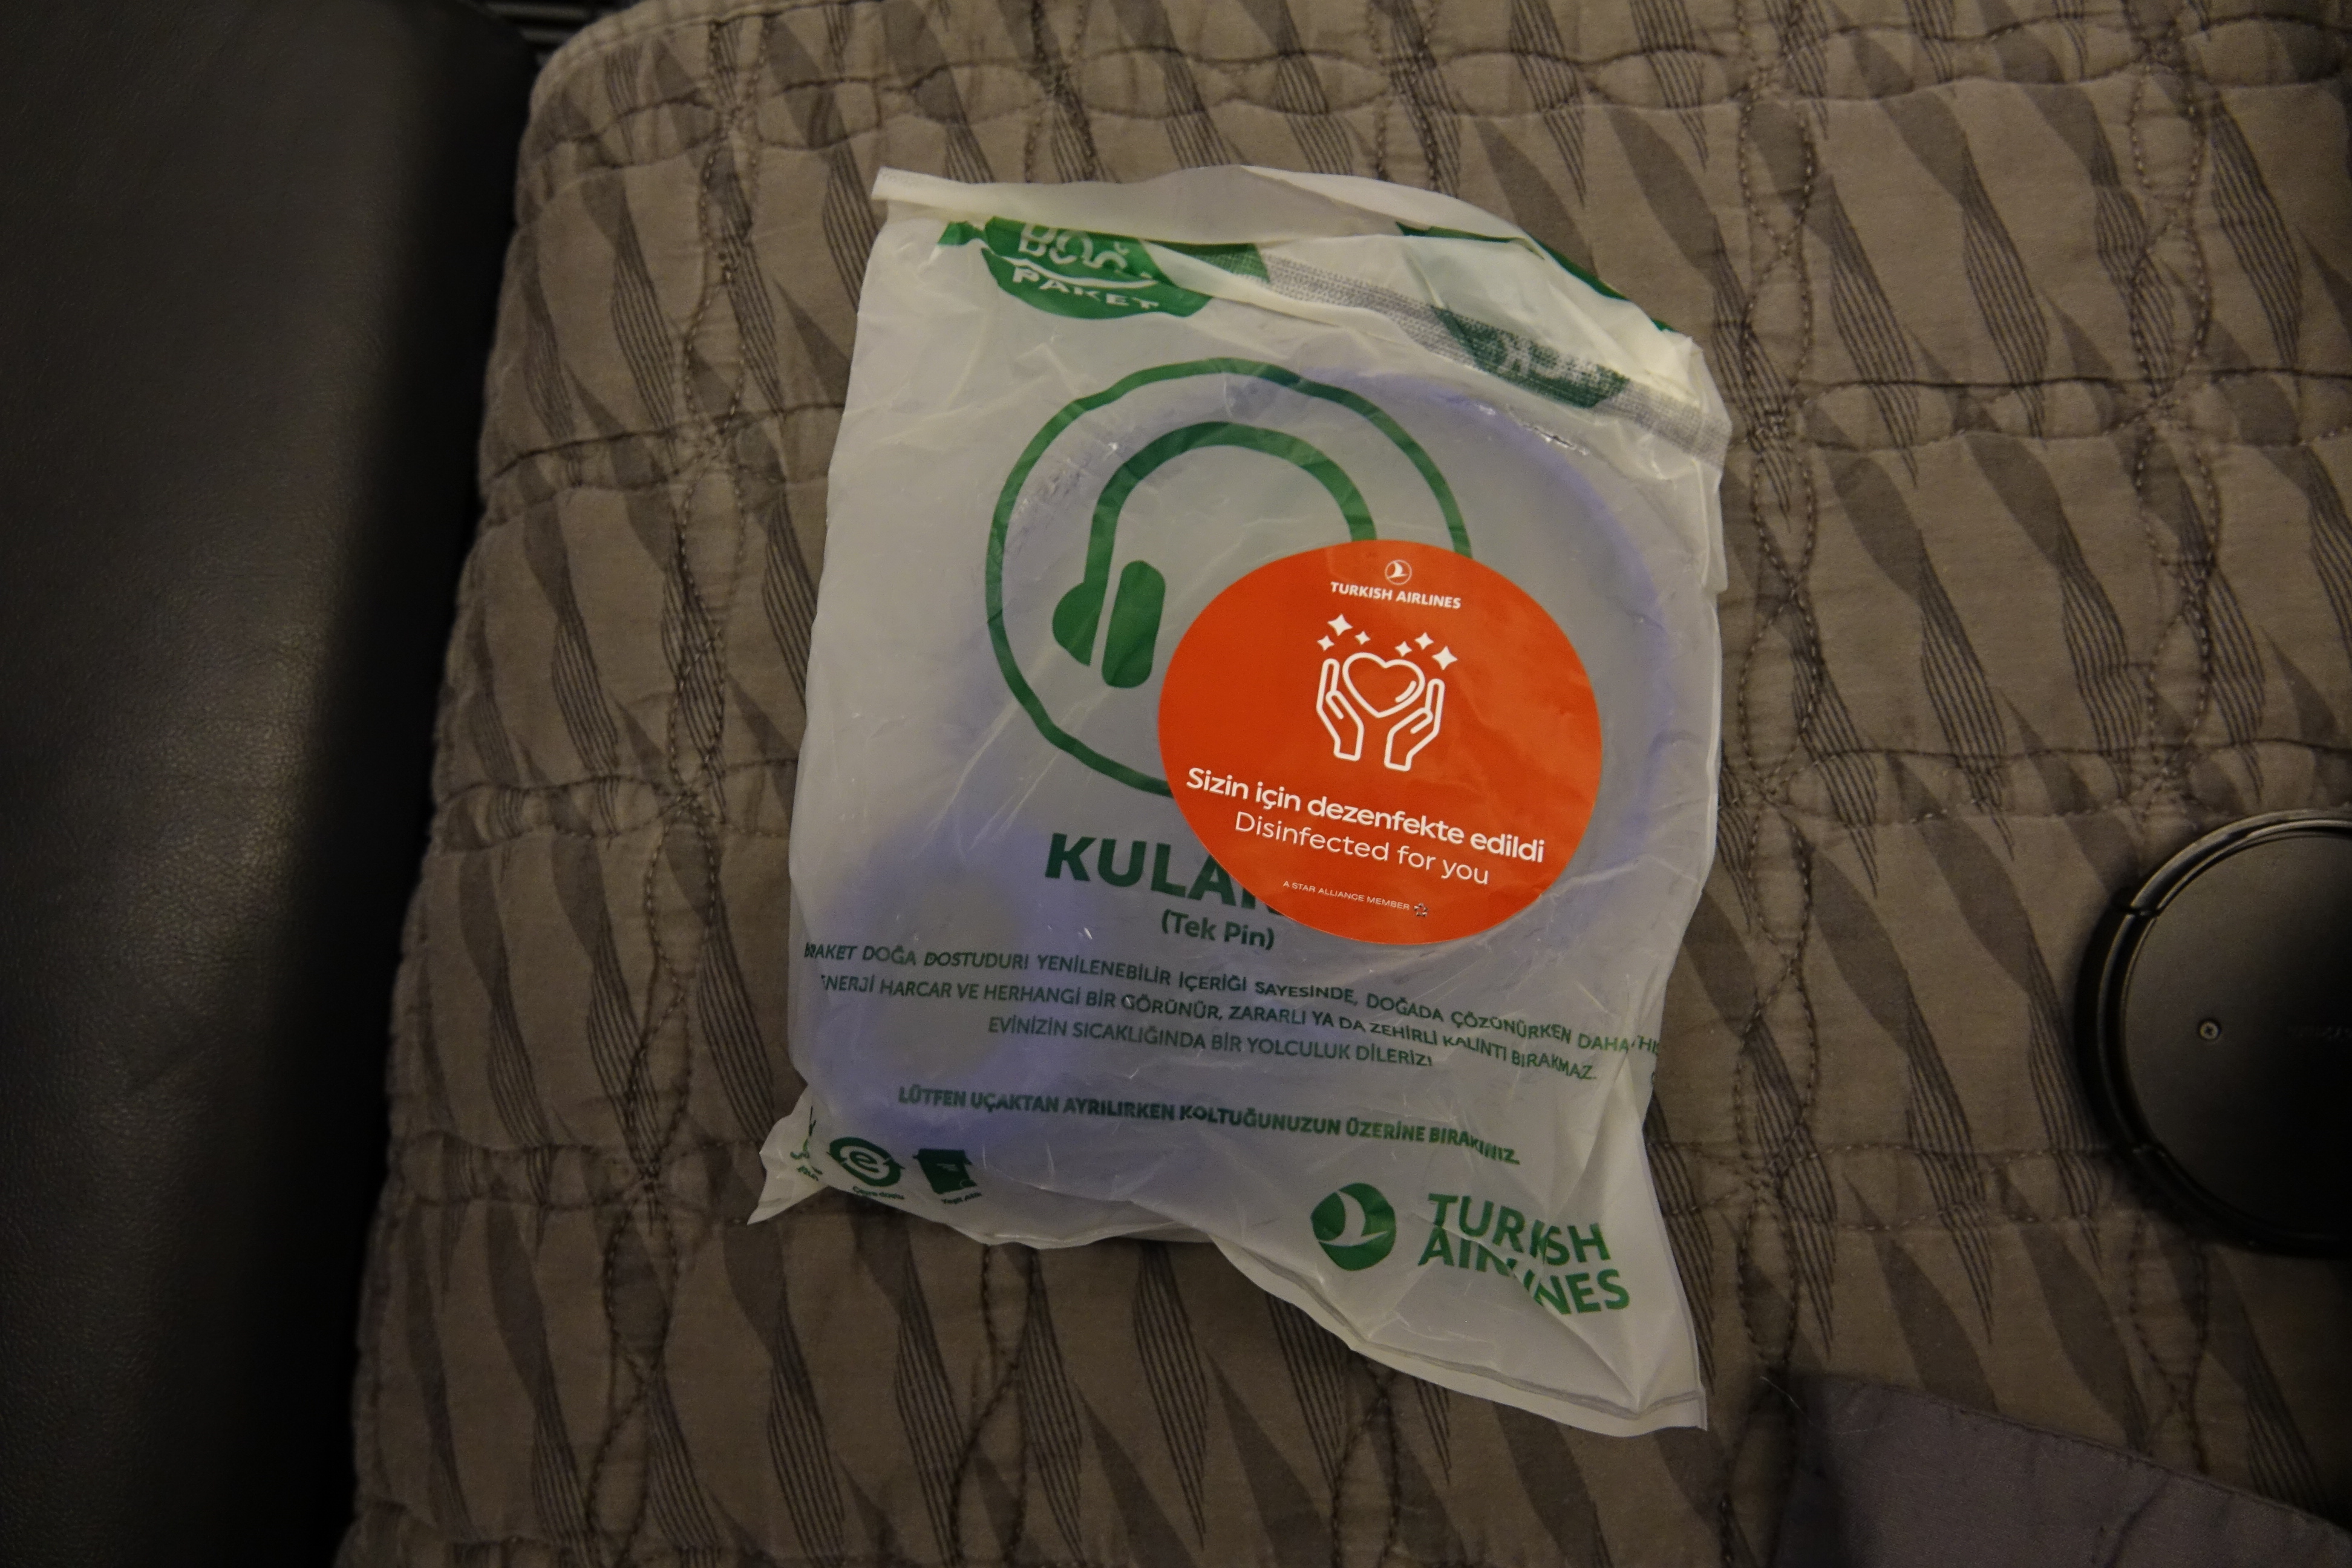 a plastic bag with a logo on it